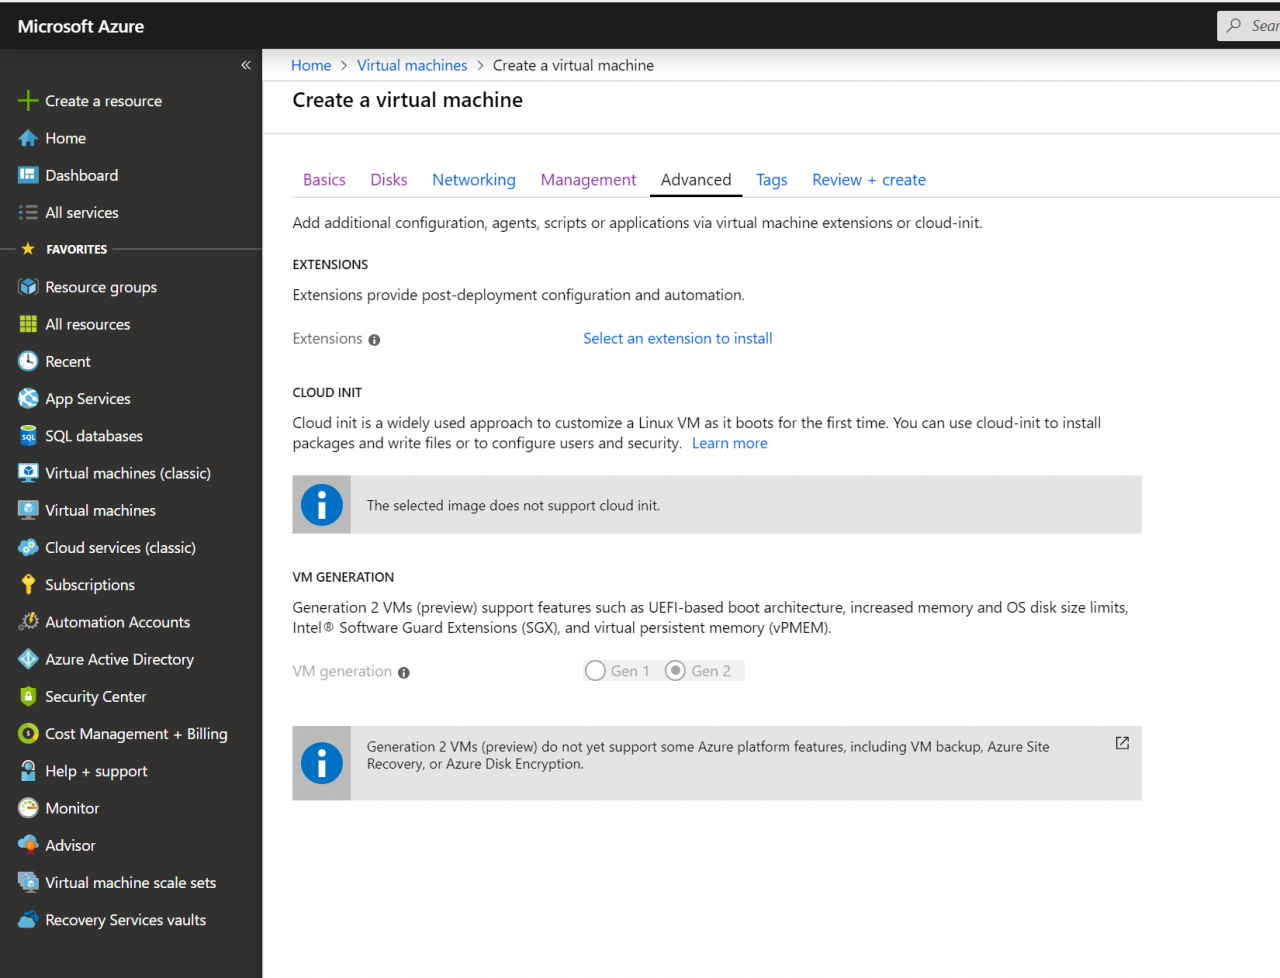 Gen 2 Virtual Machines Preview in Microsoft Azure (Image Credit: Russell Smith)